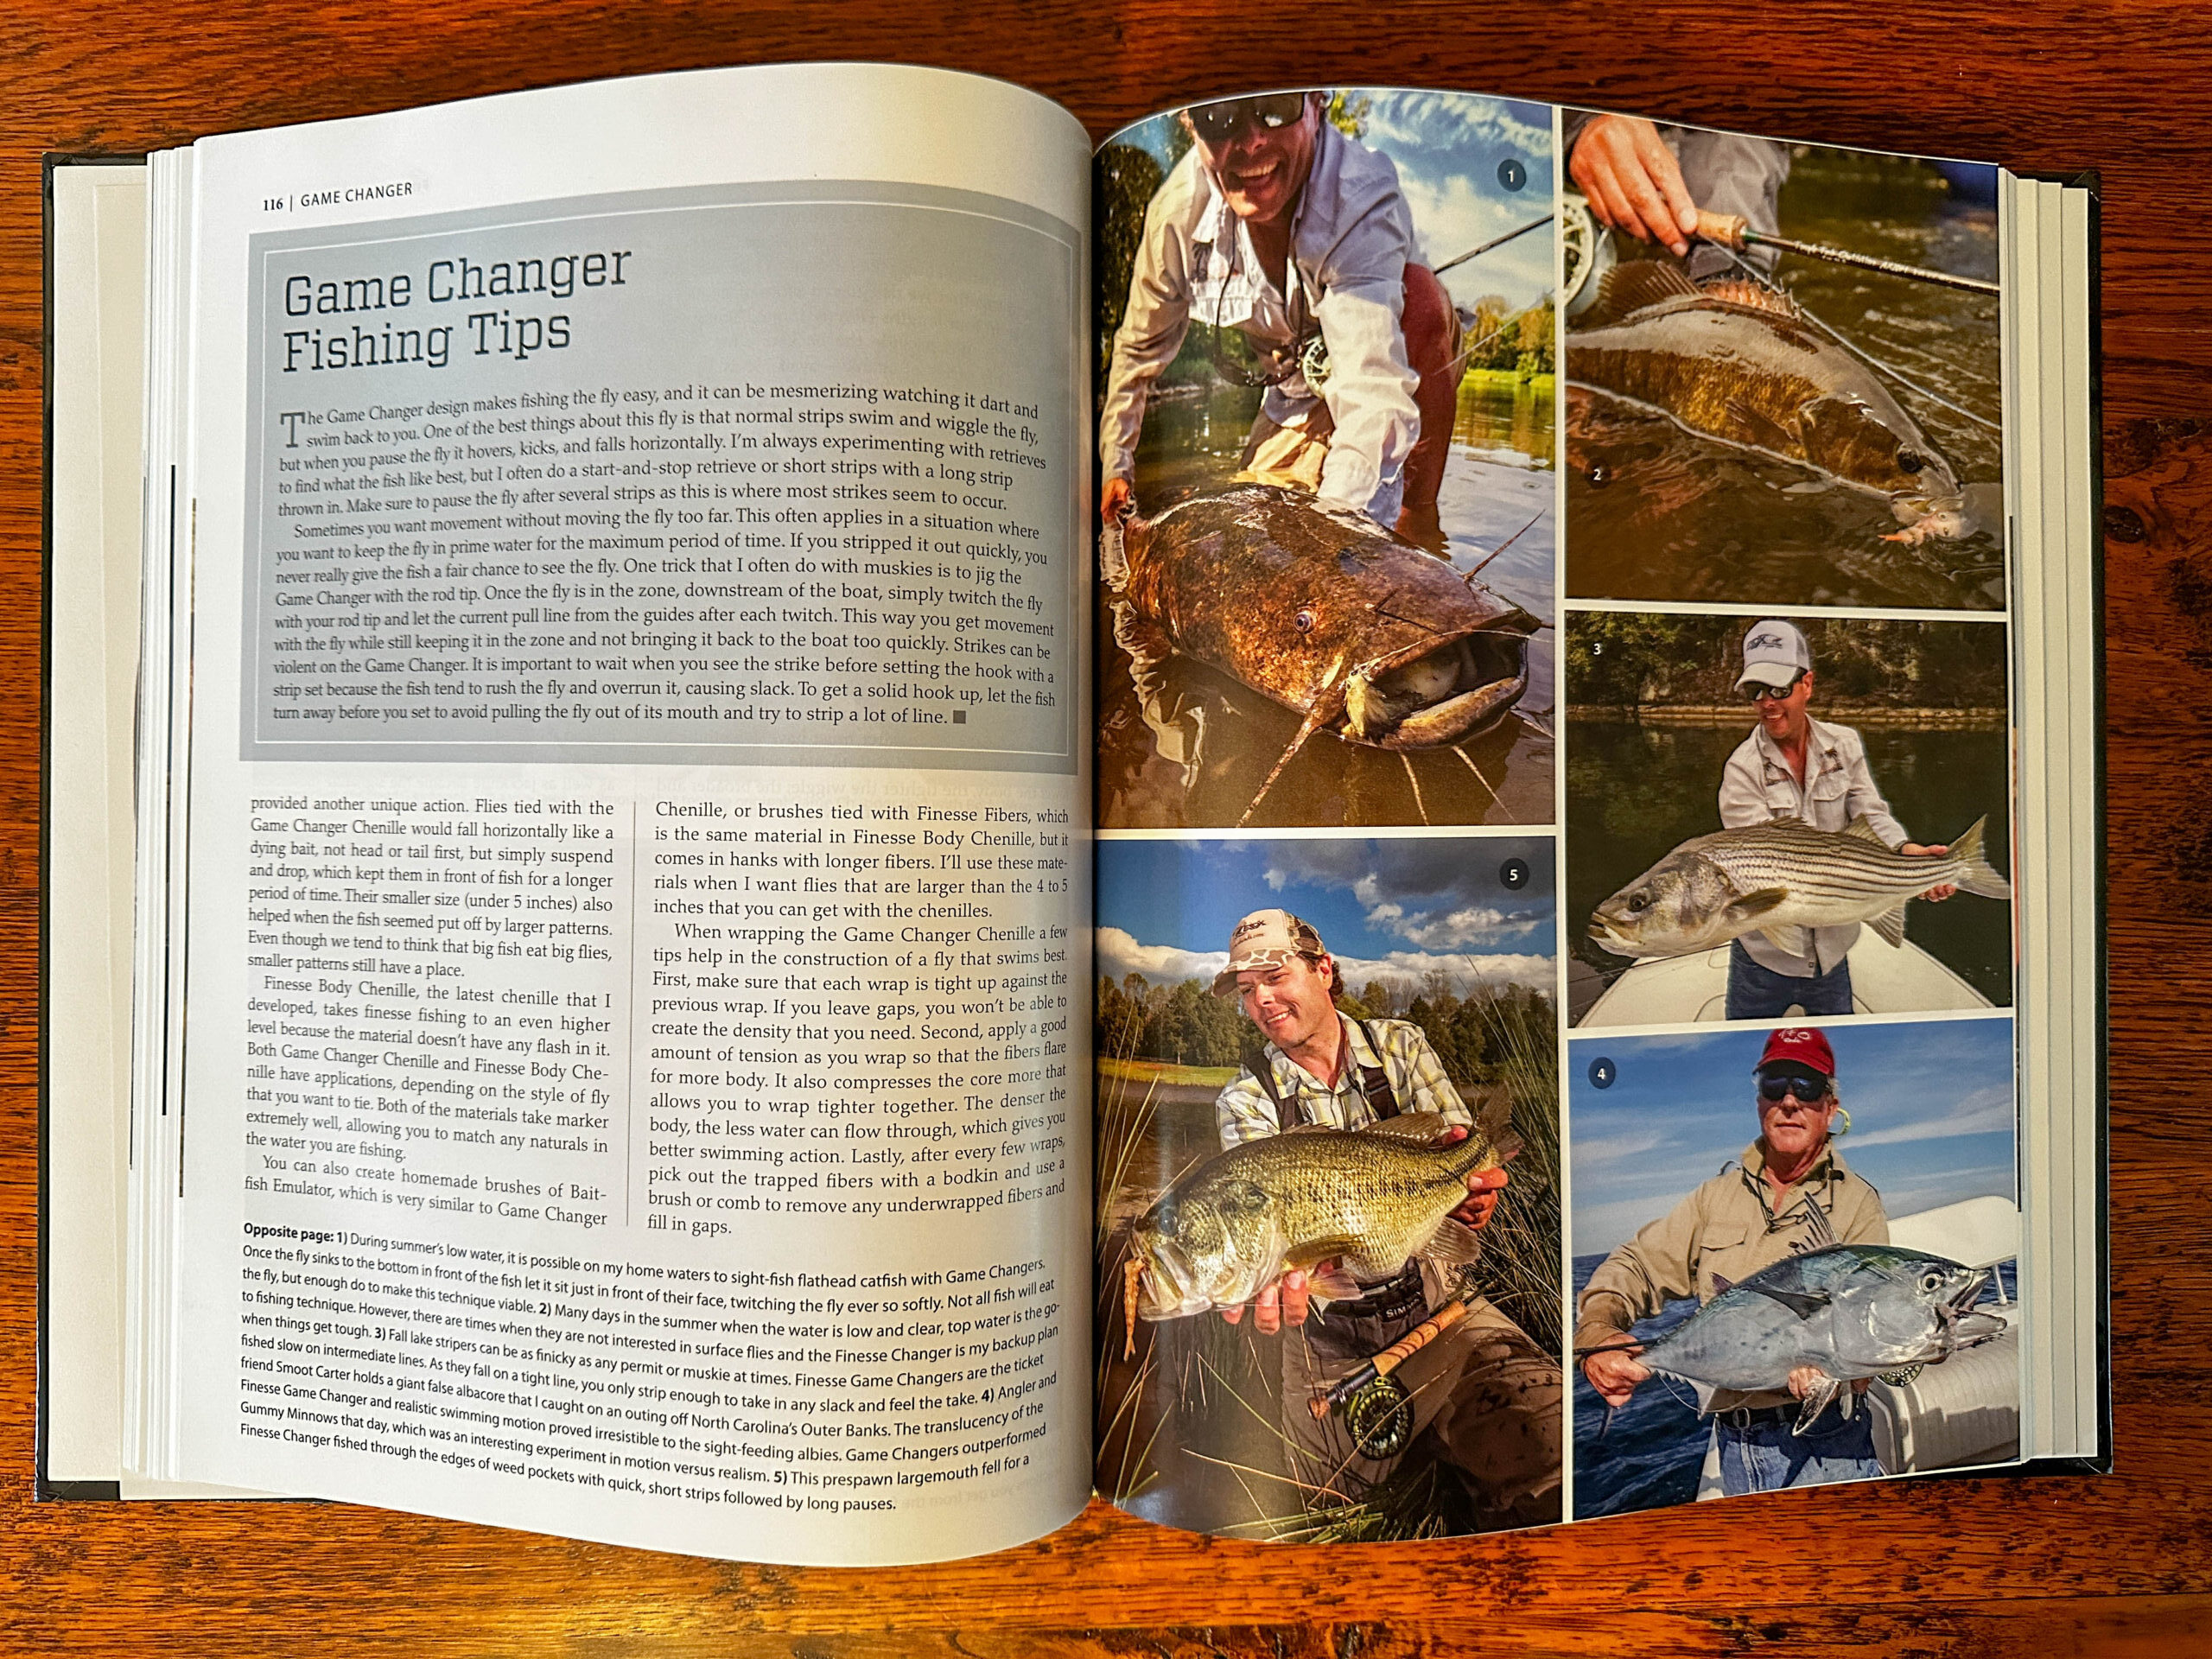 Book review: Fly tying, Global FlyFisher